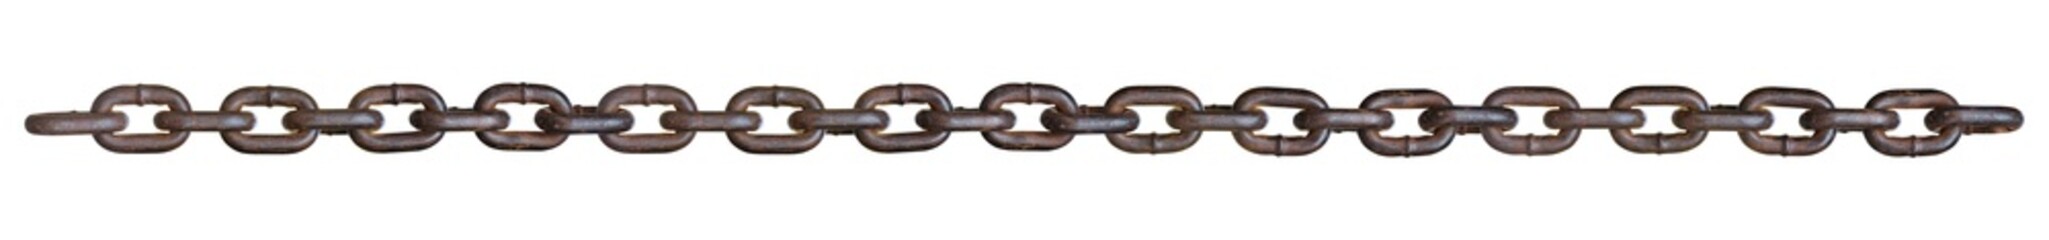 Chain isolated on white background. Clipping path included. - 345319955